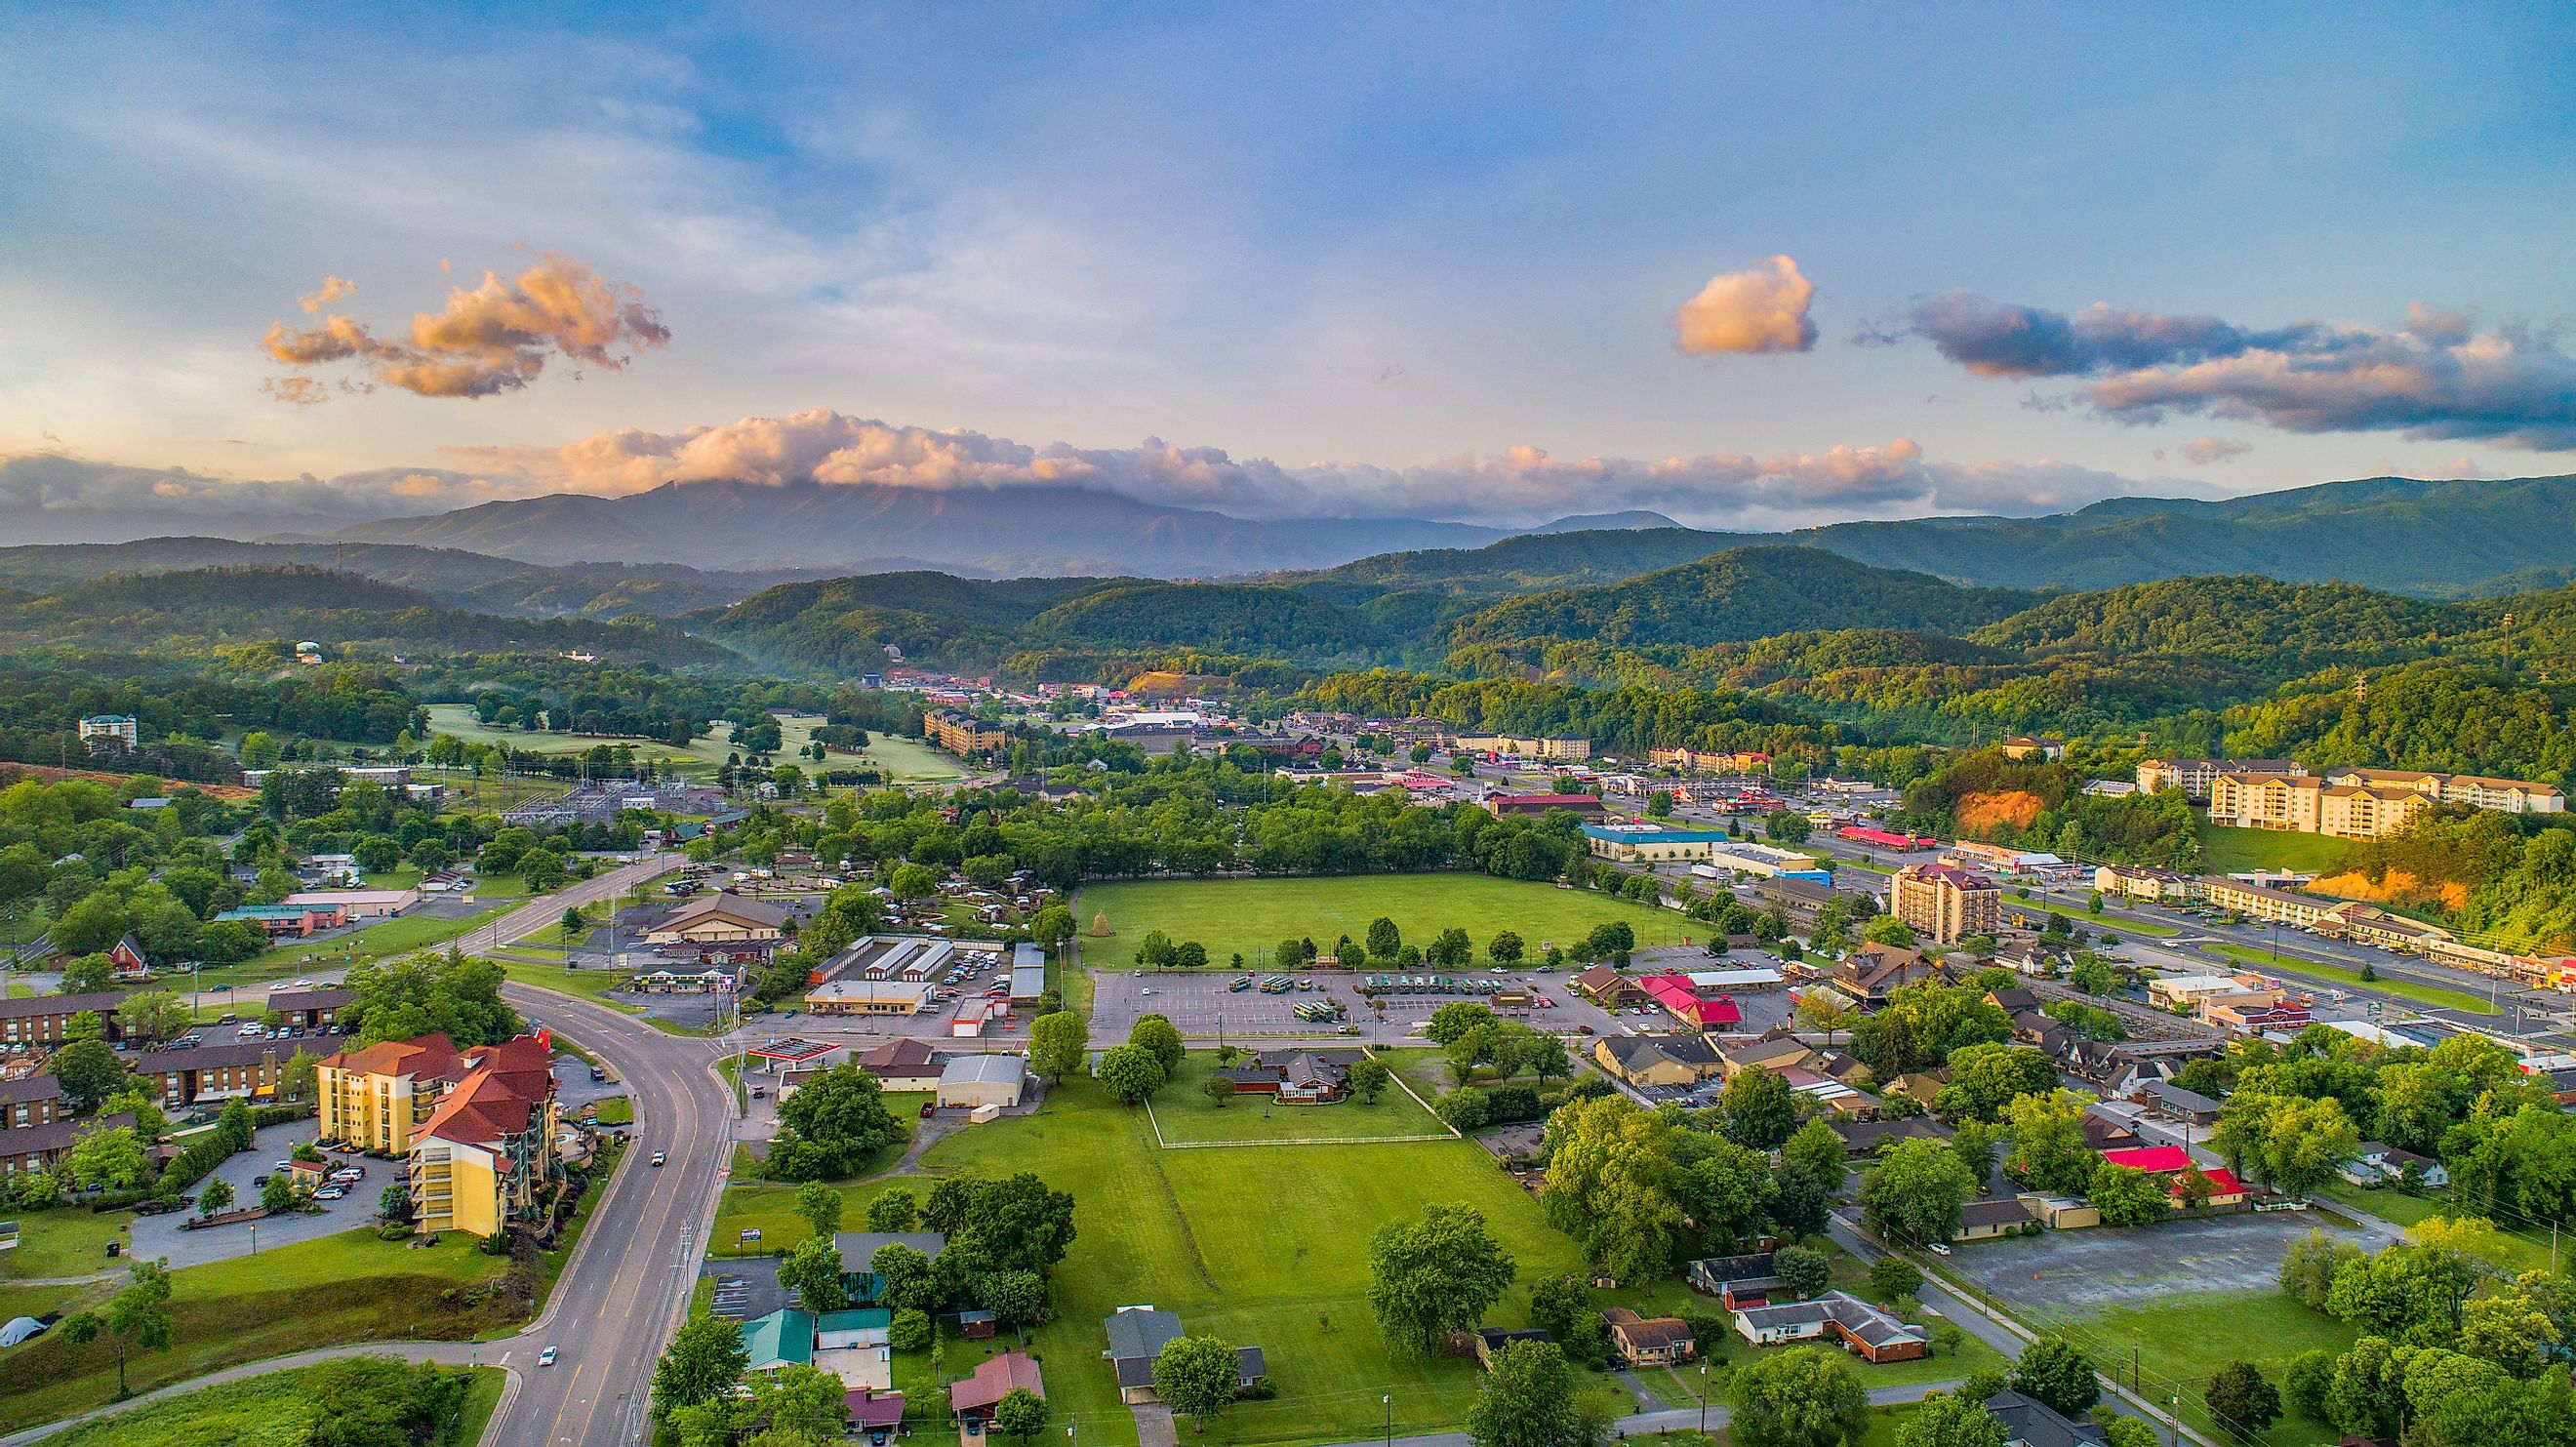 The gorgeous city of Pigeon Force in Tennessee.